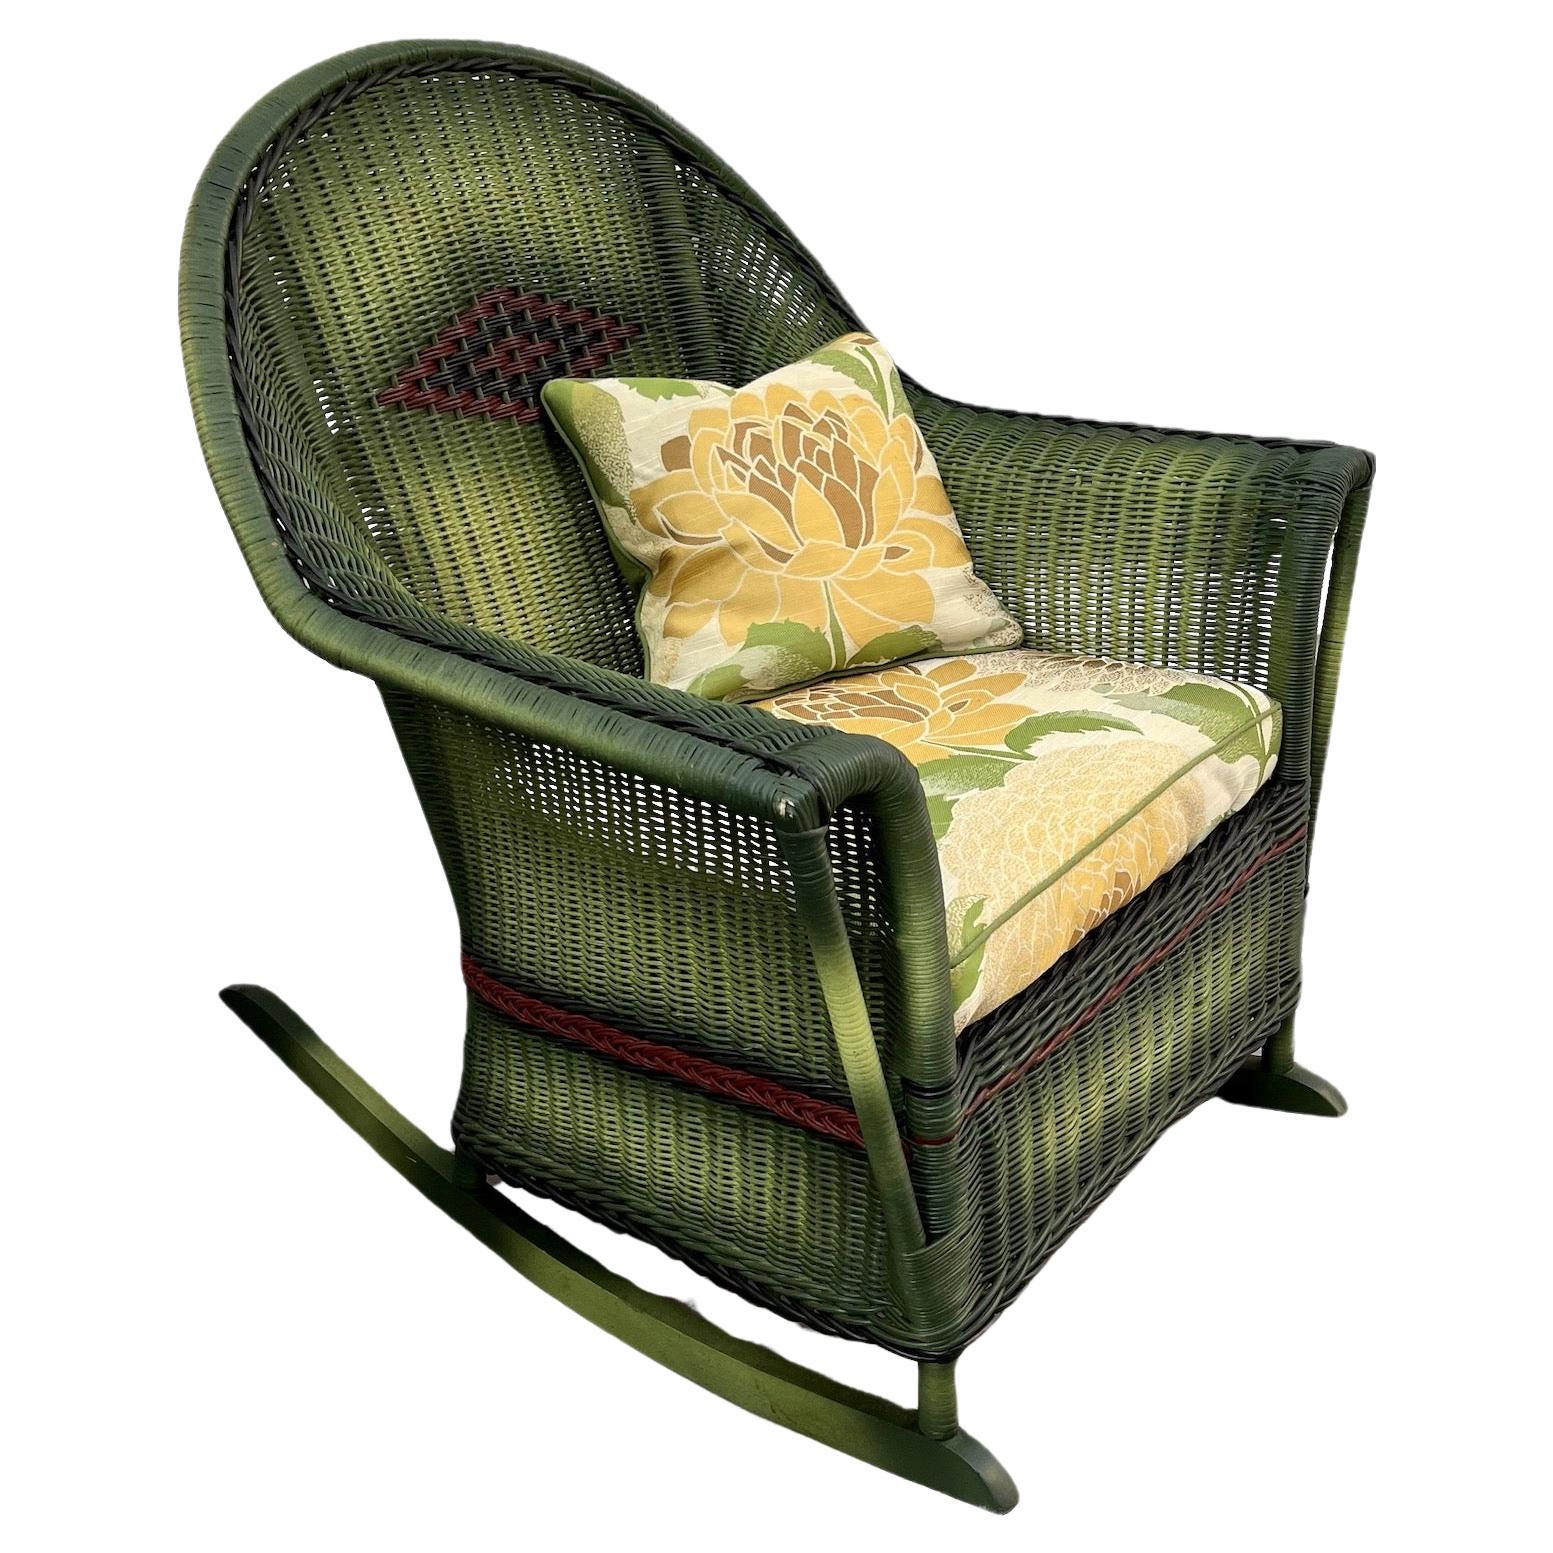 A close Woven Wicker Rocker in French Green Finish For Sale